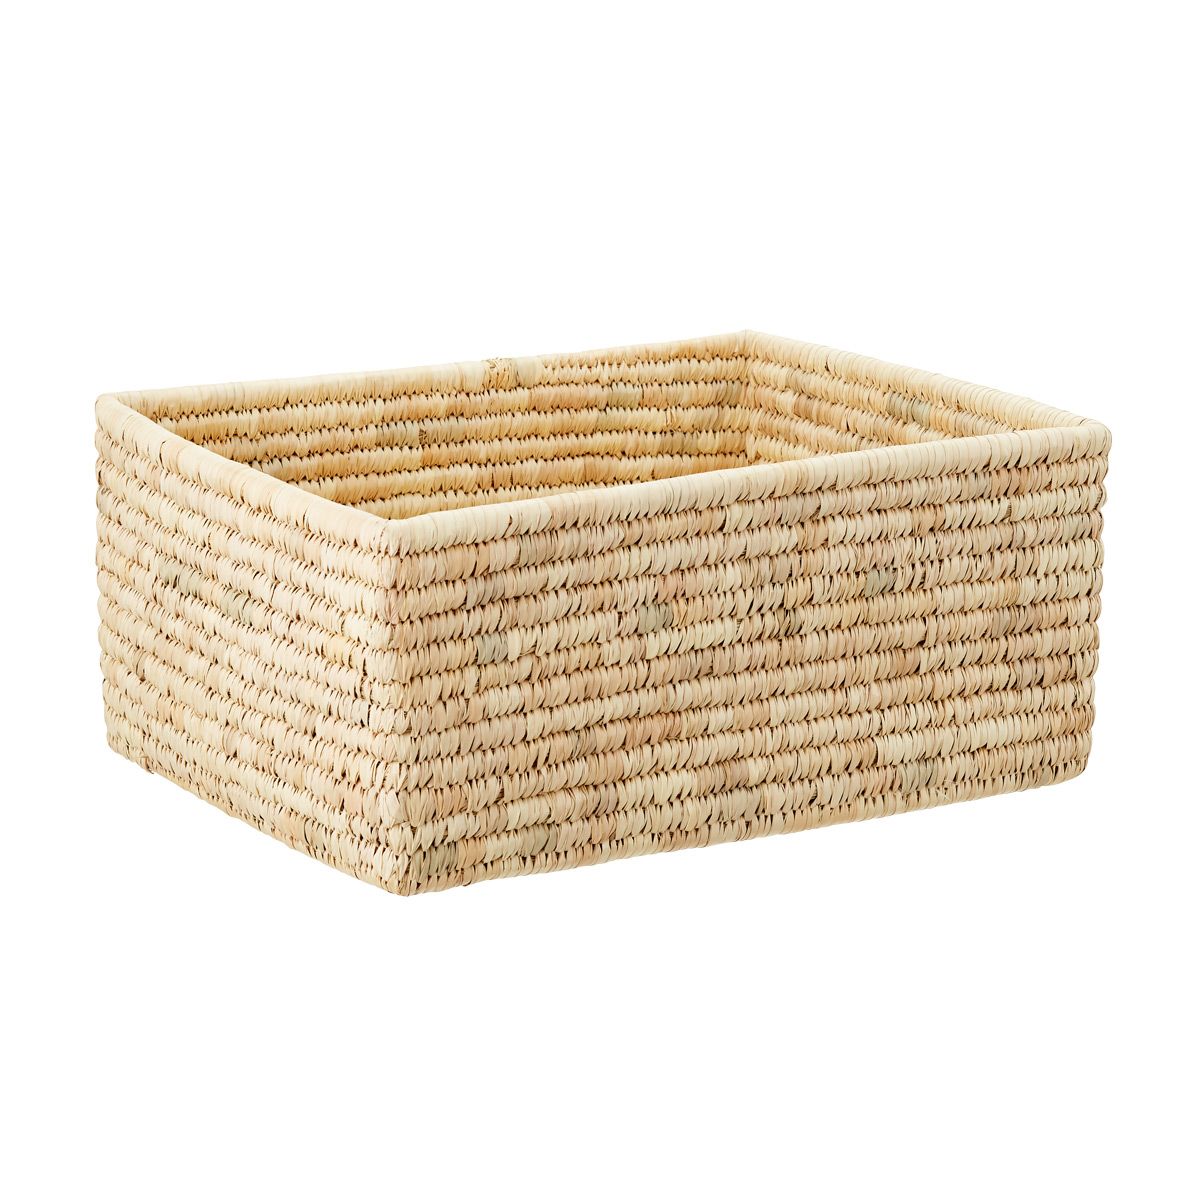 Hand-Woven Palm Leaf Baskets | The Container Store